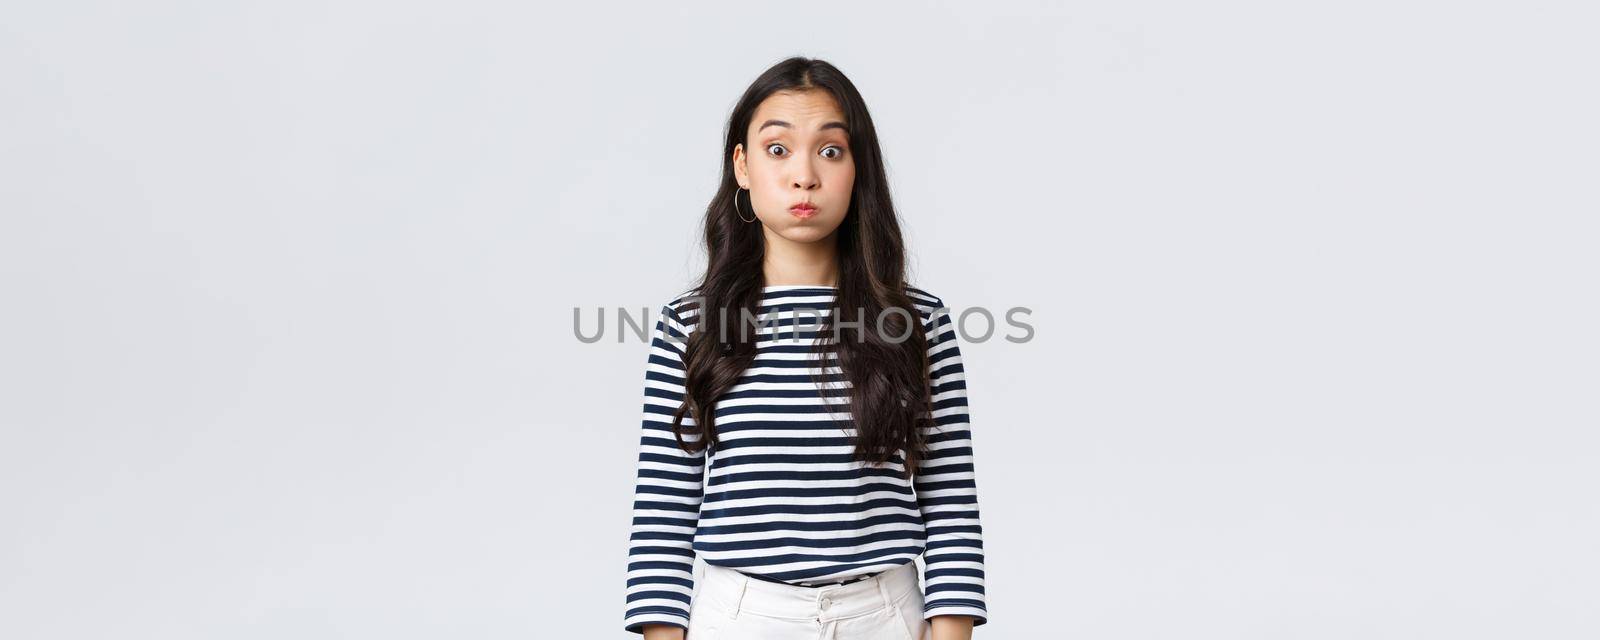 Lifestyle, people emotions and casual concept. Confused cute and puzzled girl pouting, searching for solution, holding breath and staring questioned camera, white background.